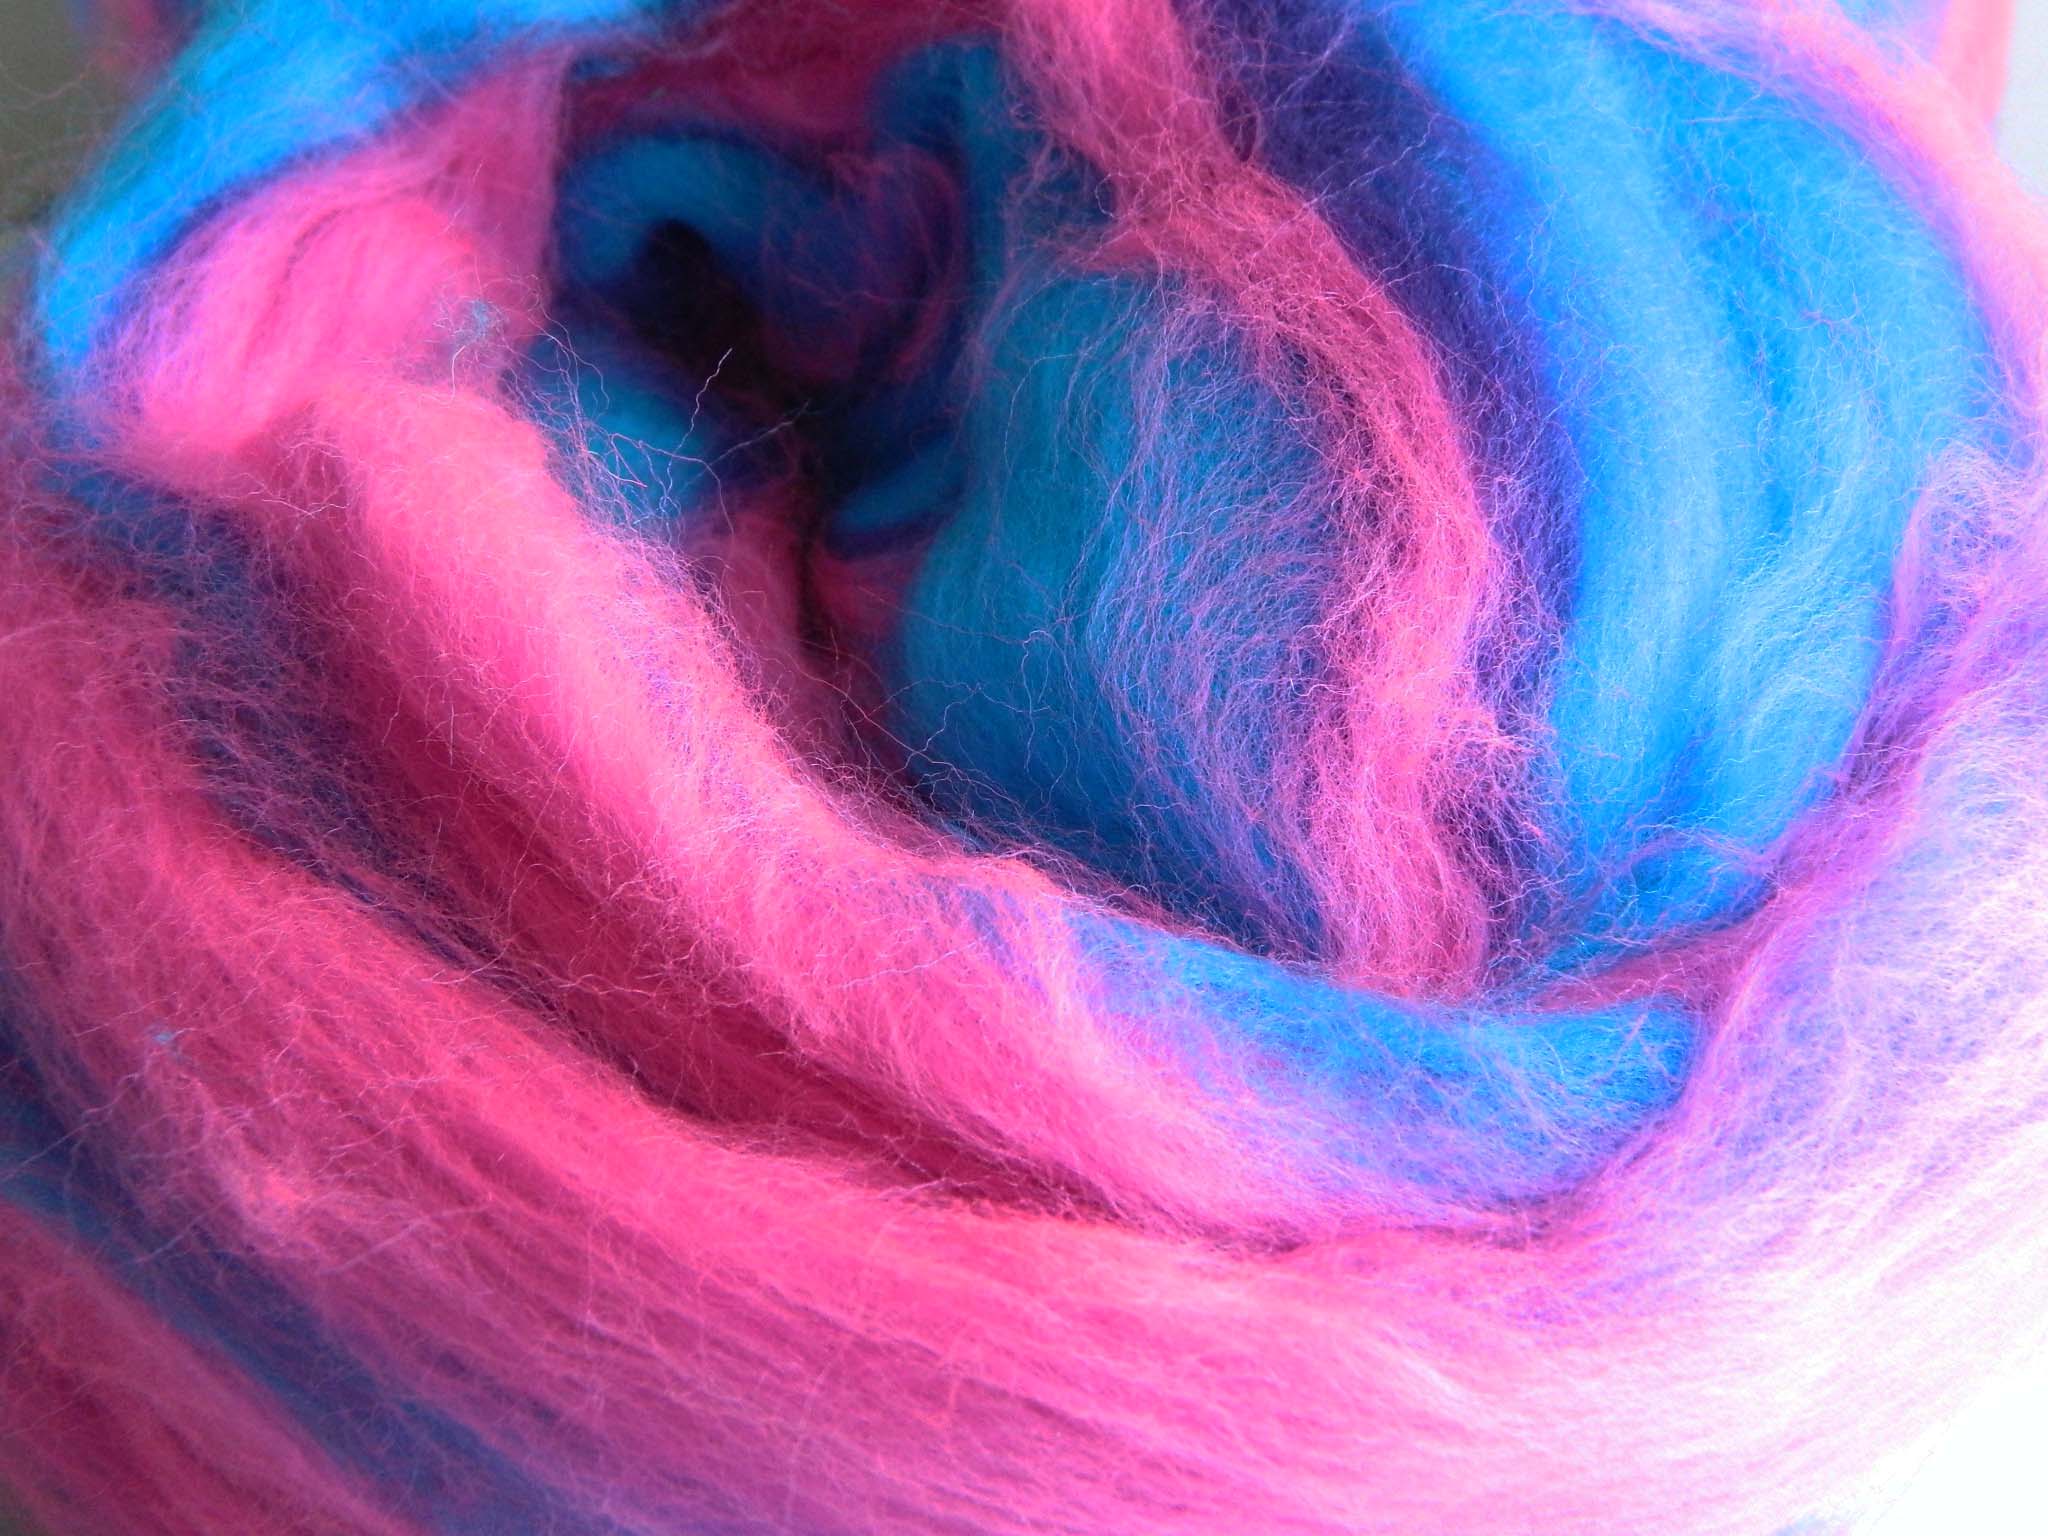 9 Cotton Candy HD Wallpapers | Backgrounds - Wallpaper Abyss